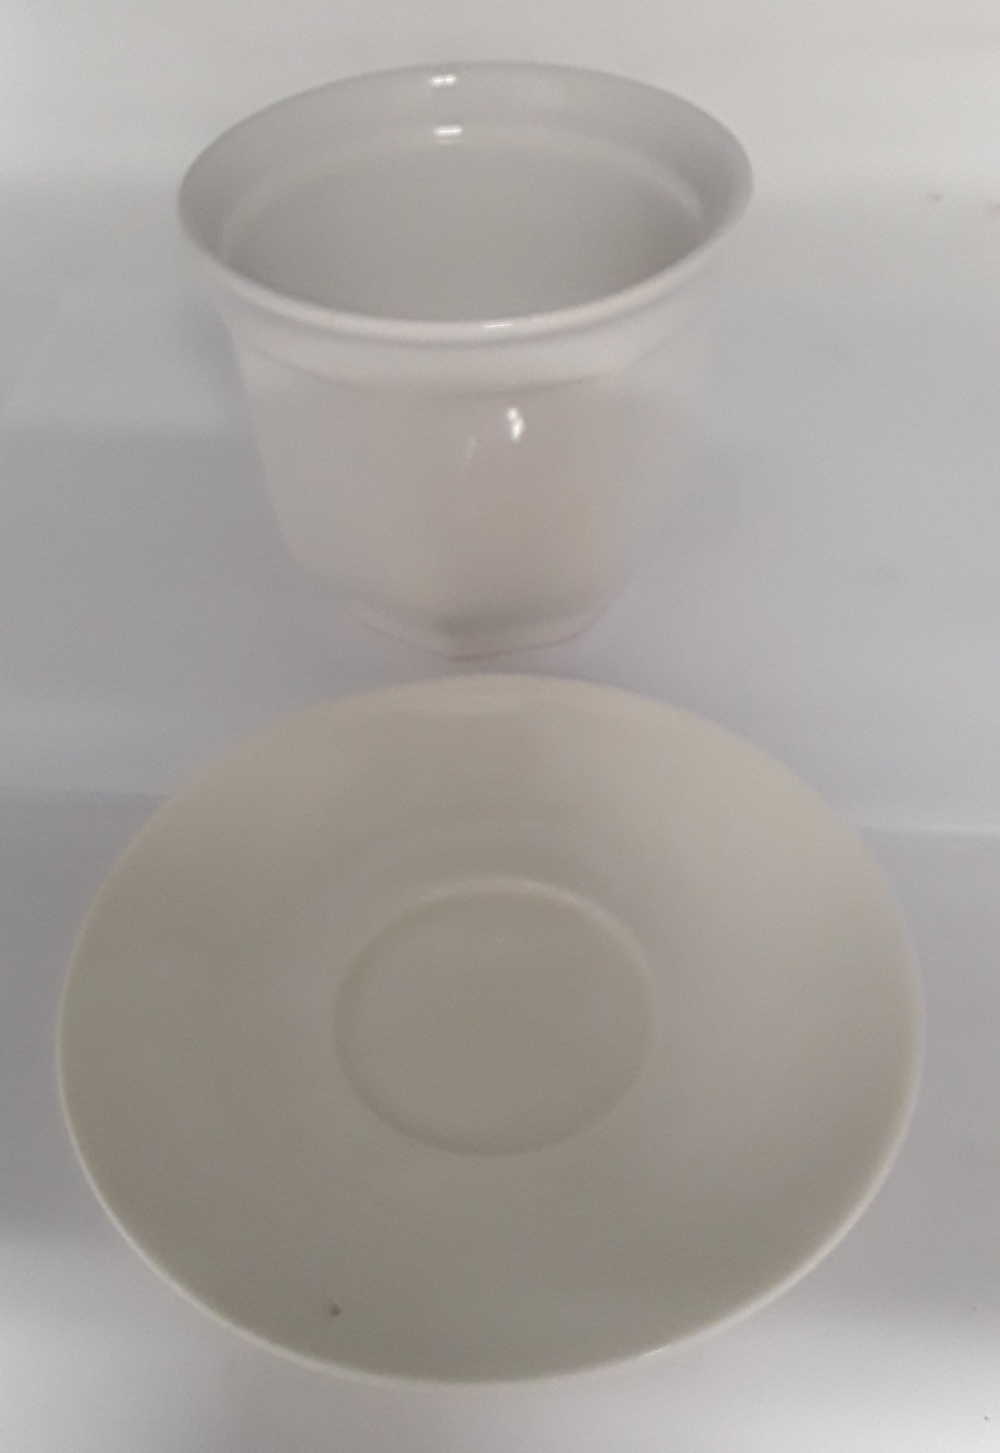 A 1938 dated Third Reich SS ceramic saucer and a 1941 dated ceramic bowl. - Image 2 of 4